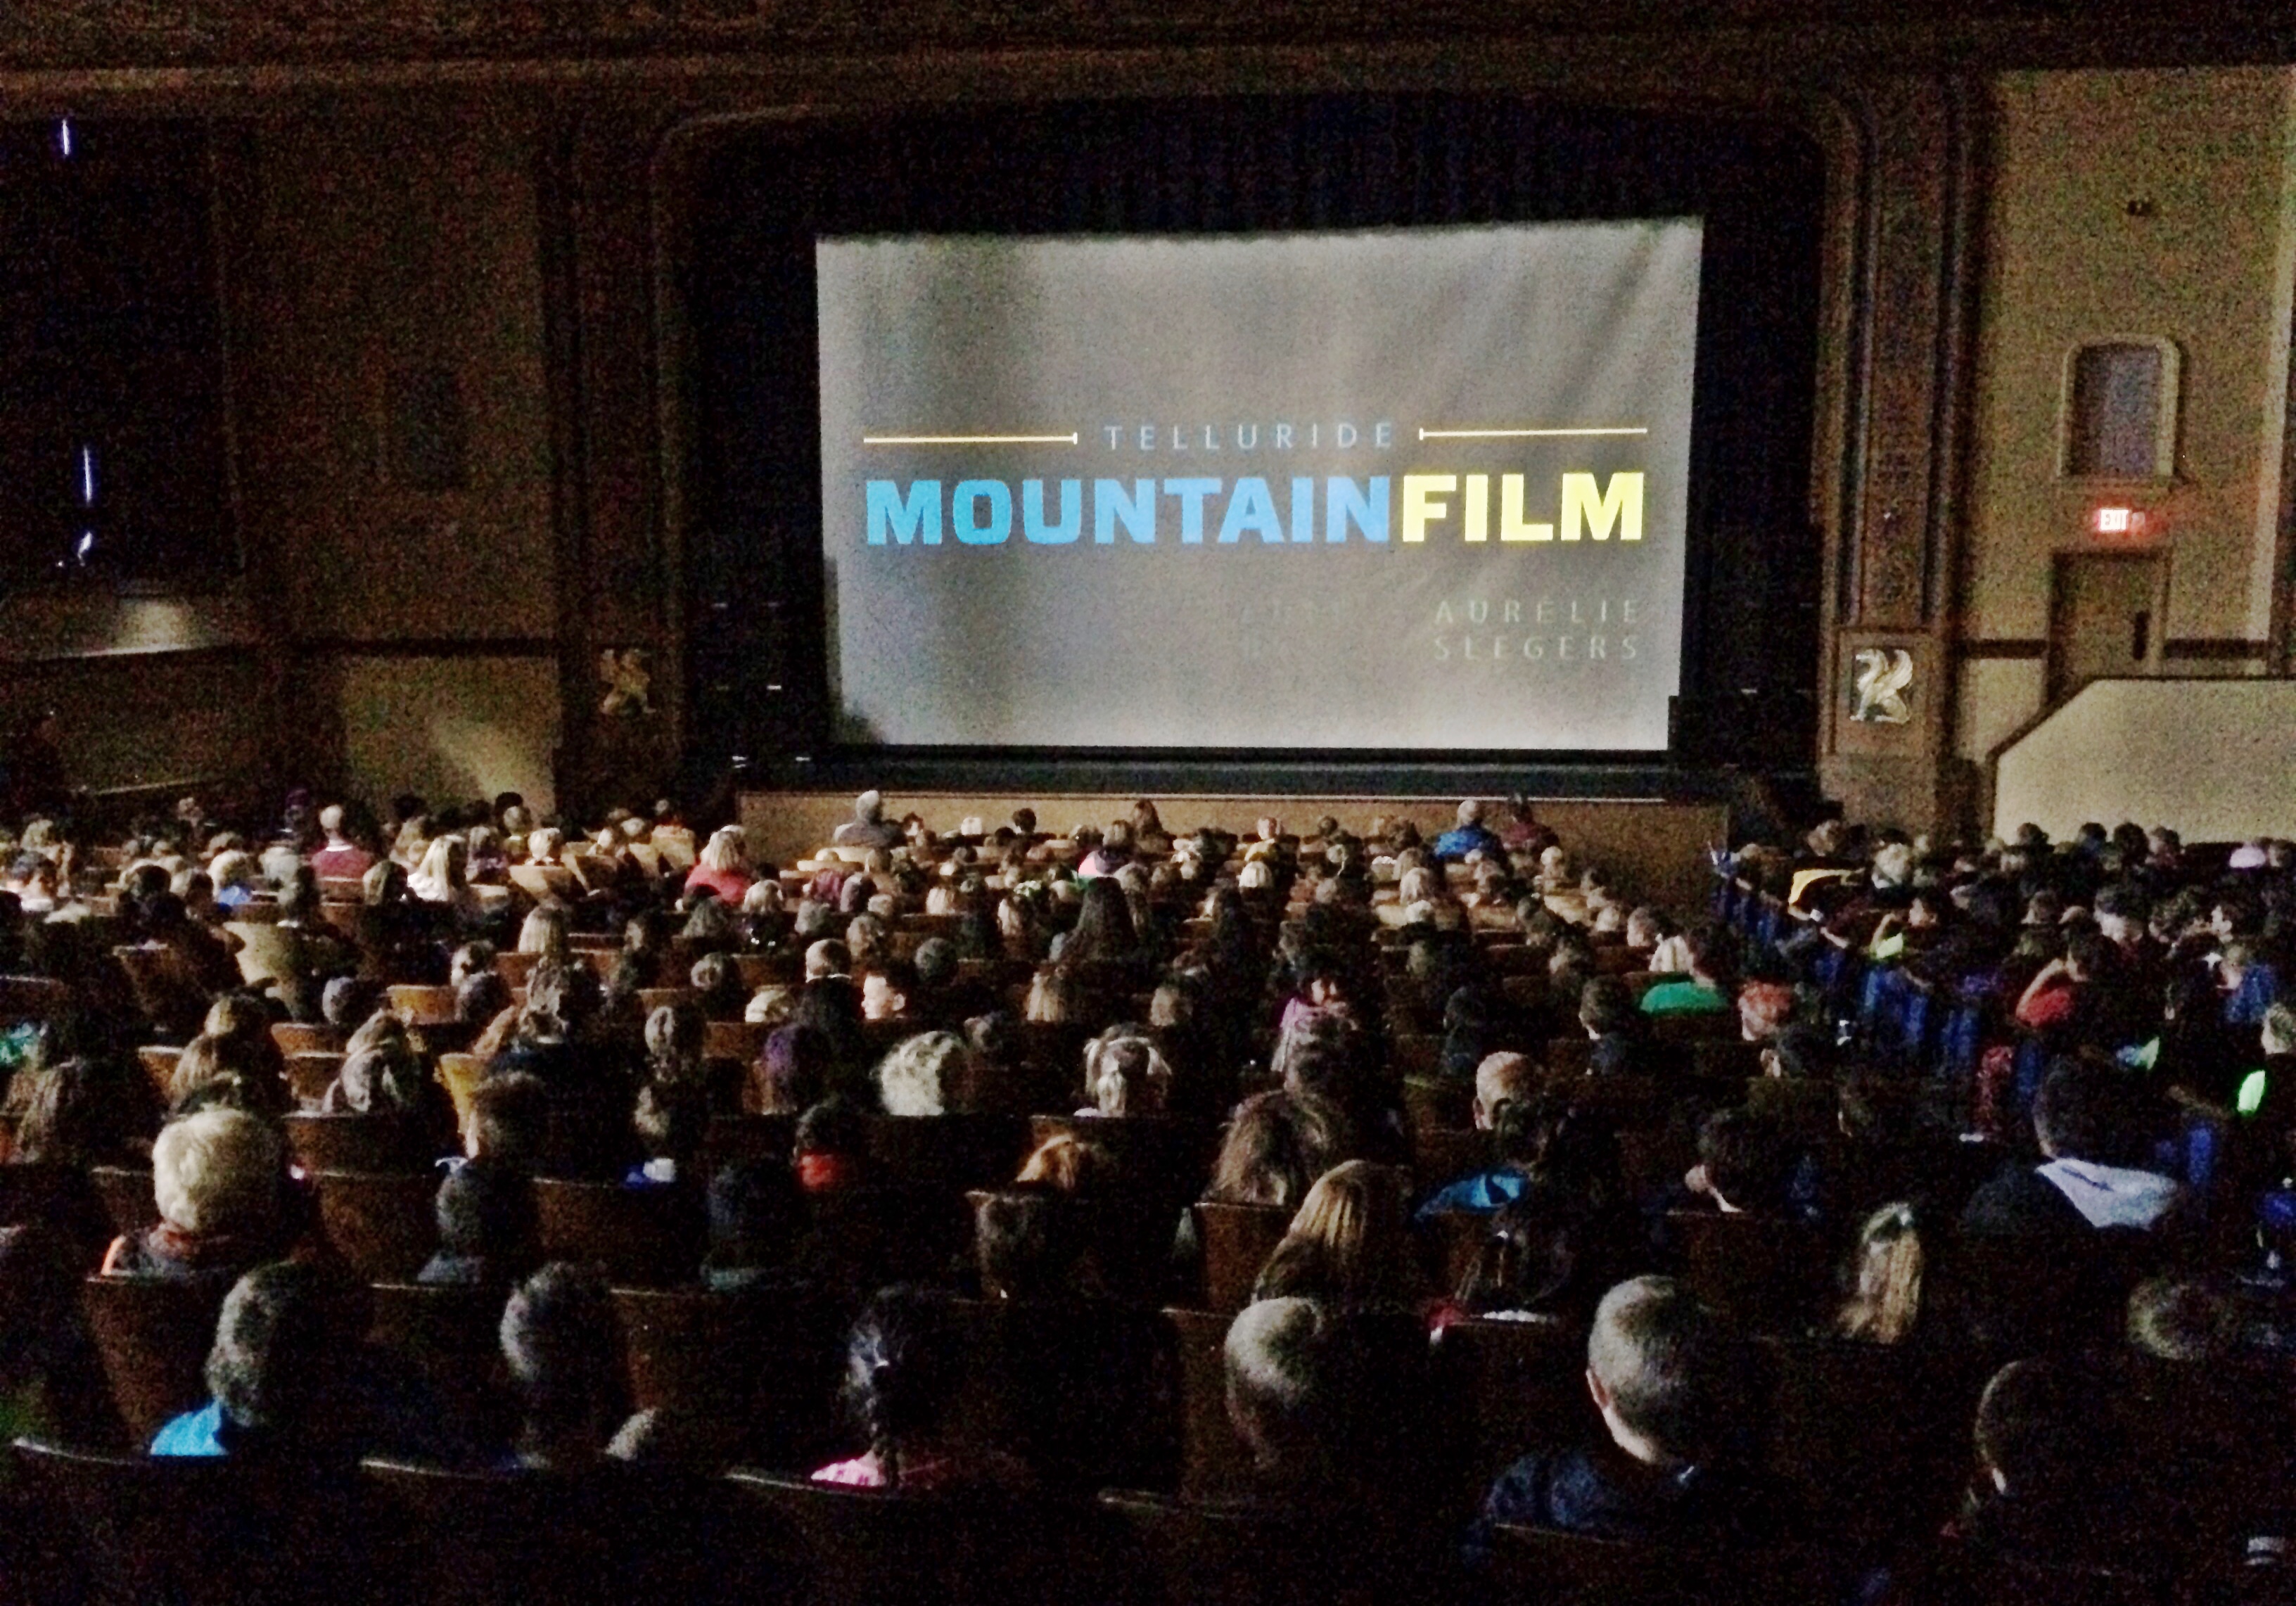 600 kids, 20 Movies and Enough Joy to Fill an Auditorium